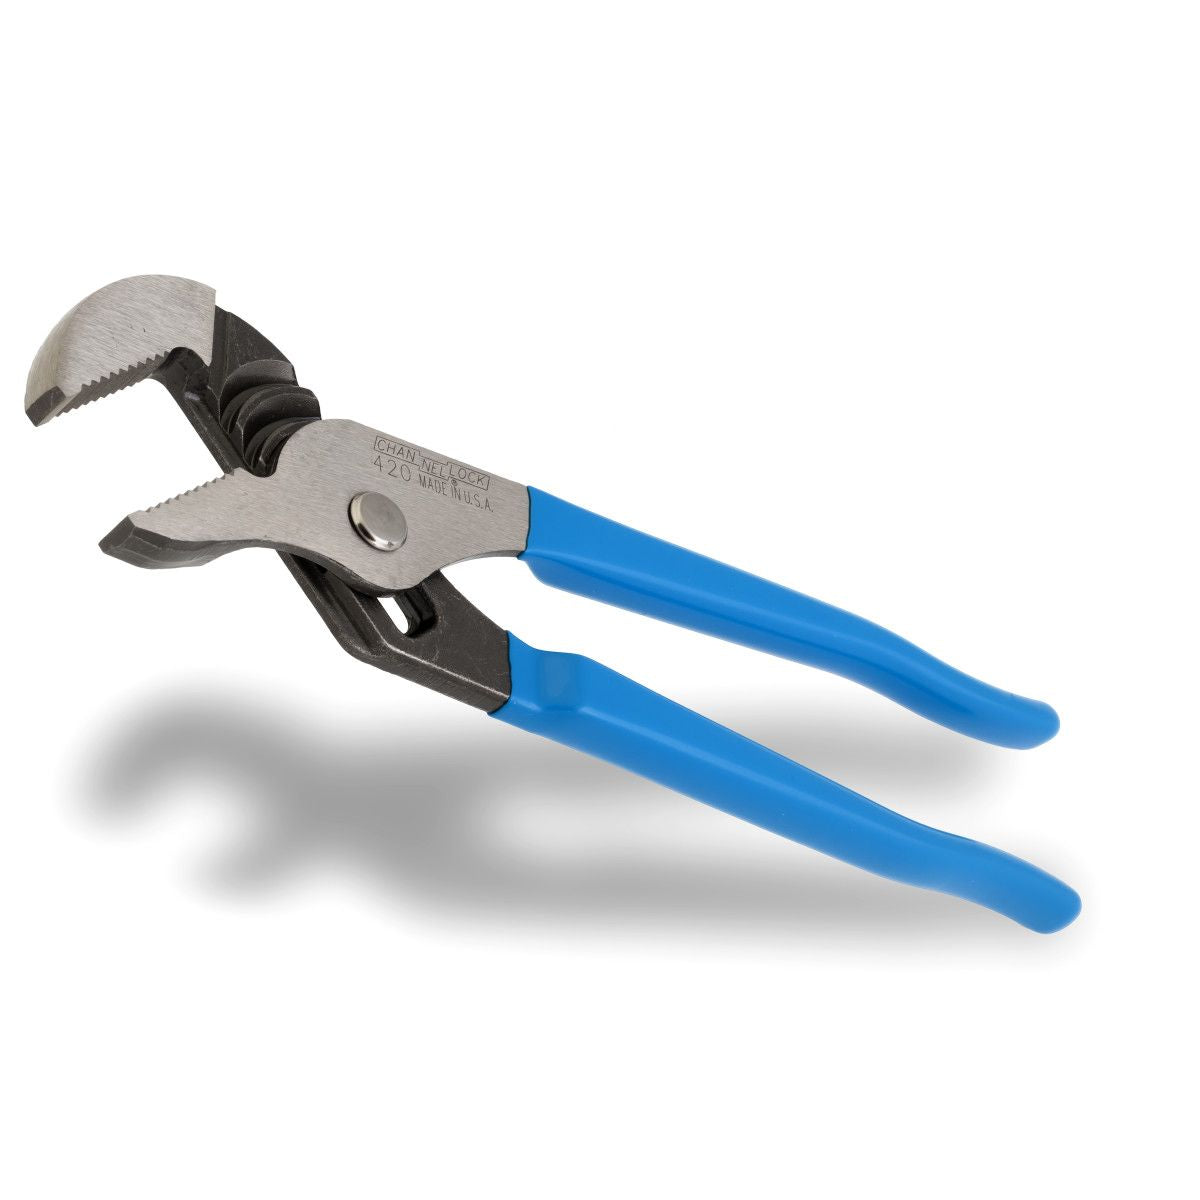 420 - 9.5" Straight Jaw Tongue & Groove Pliers